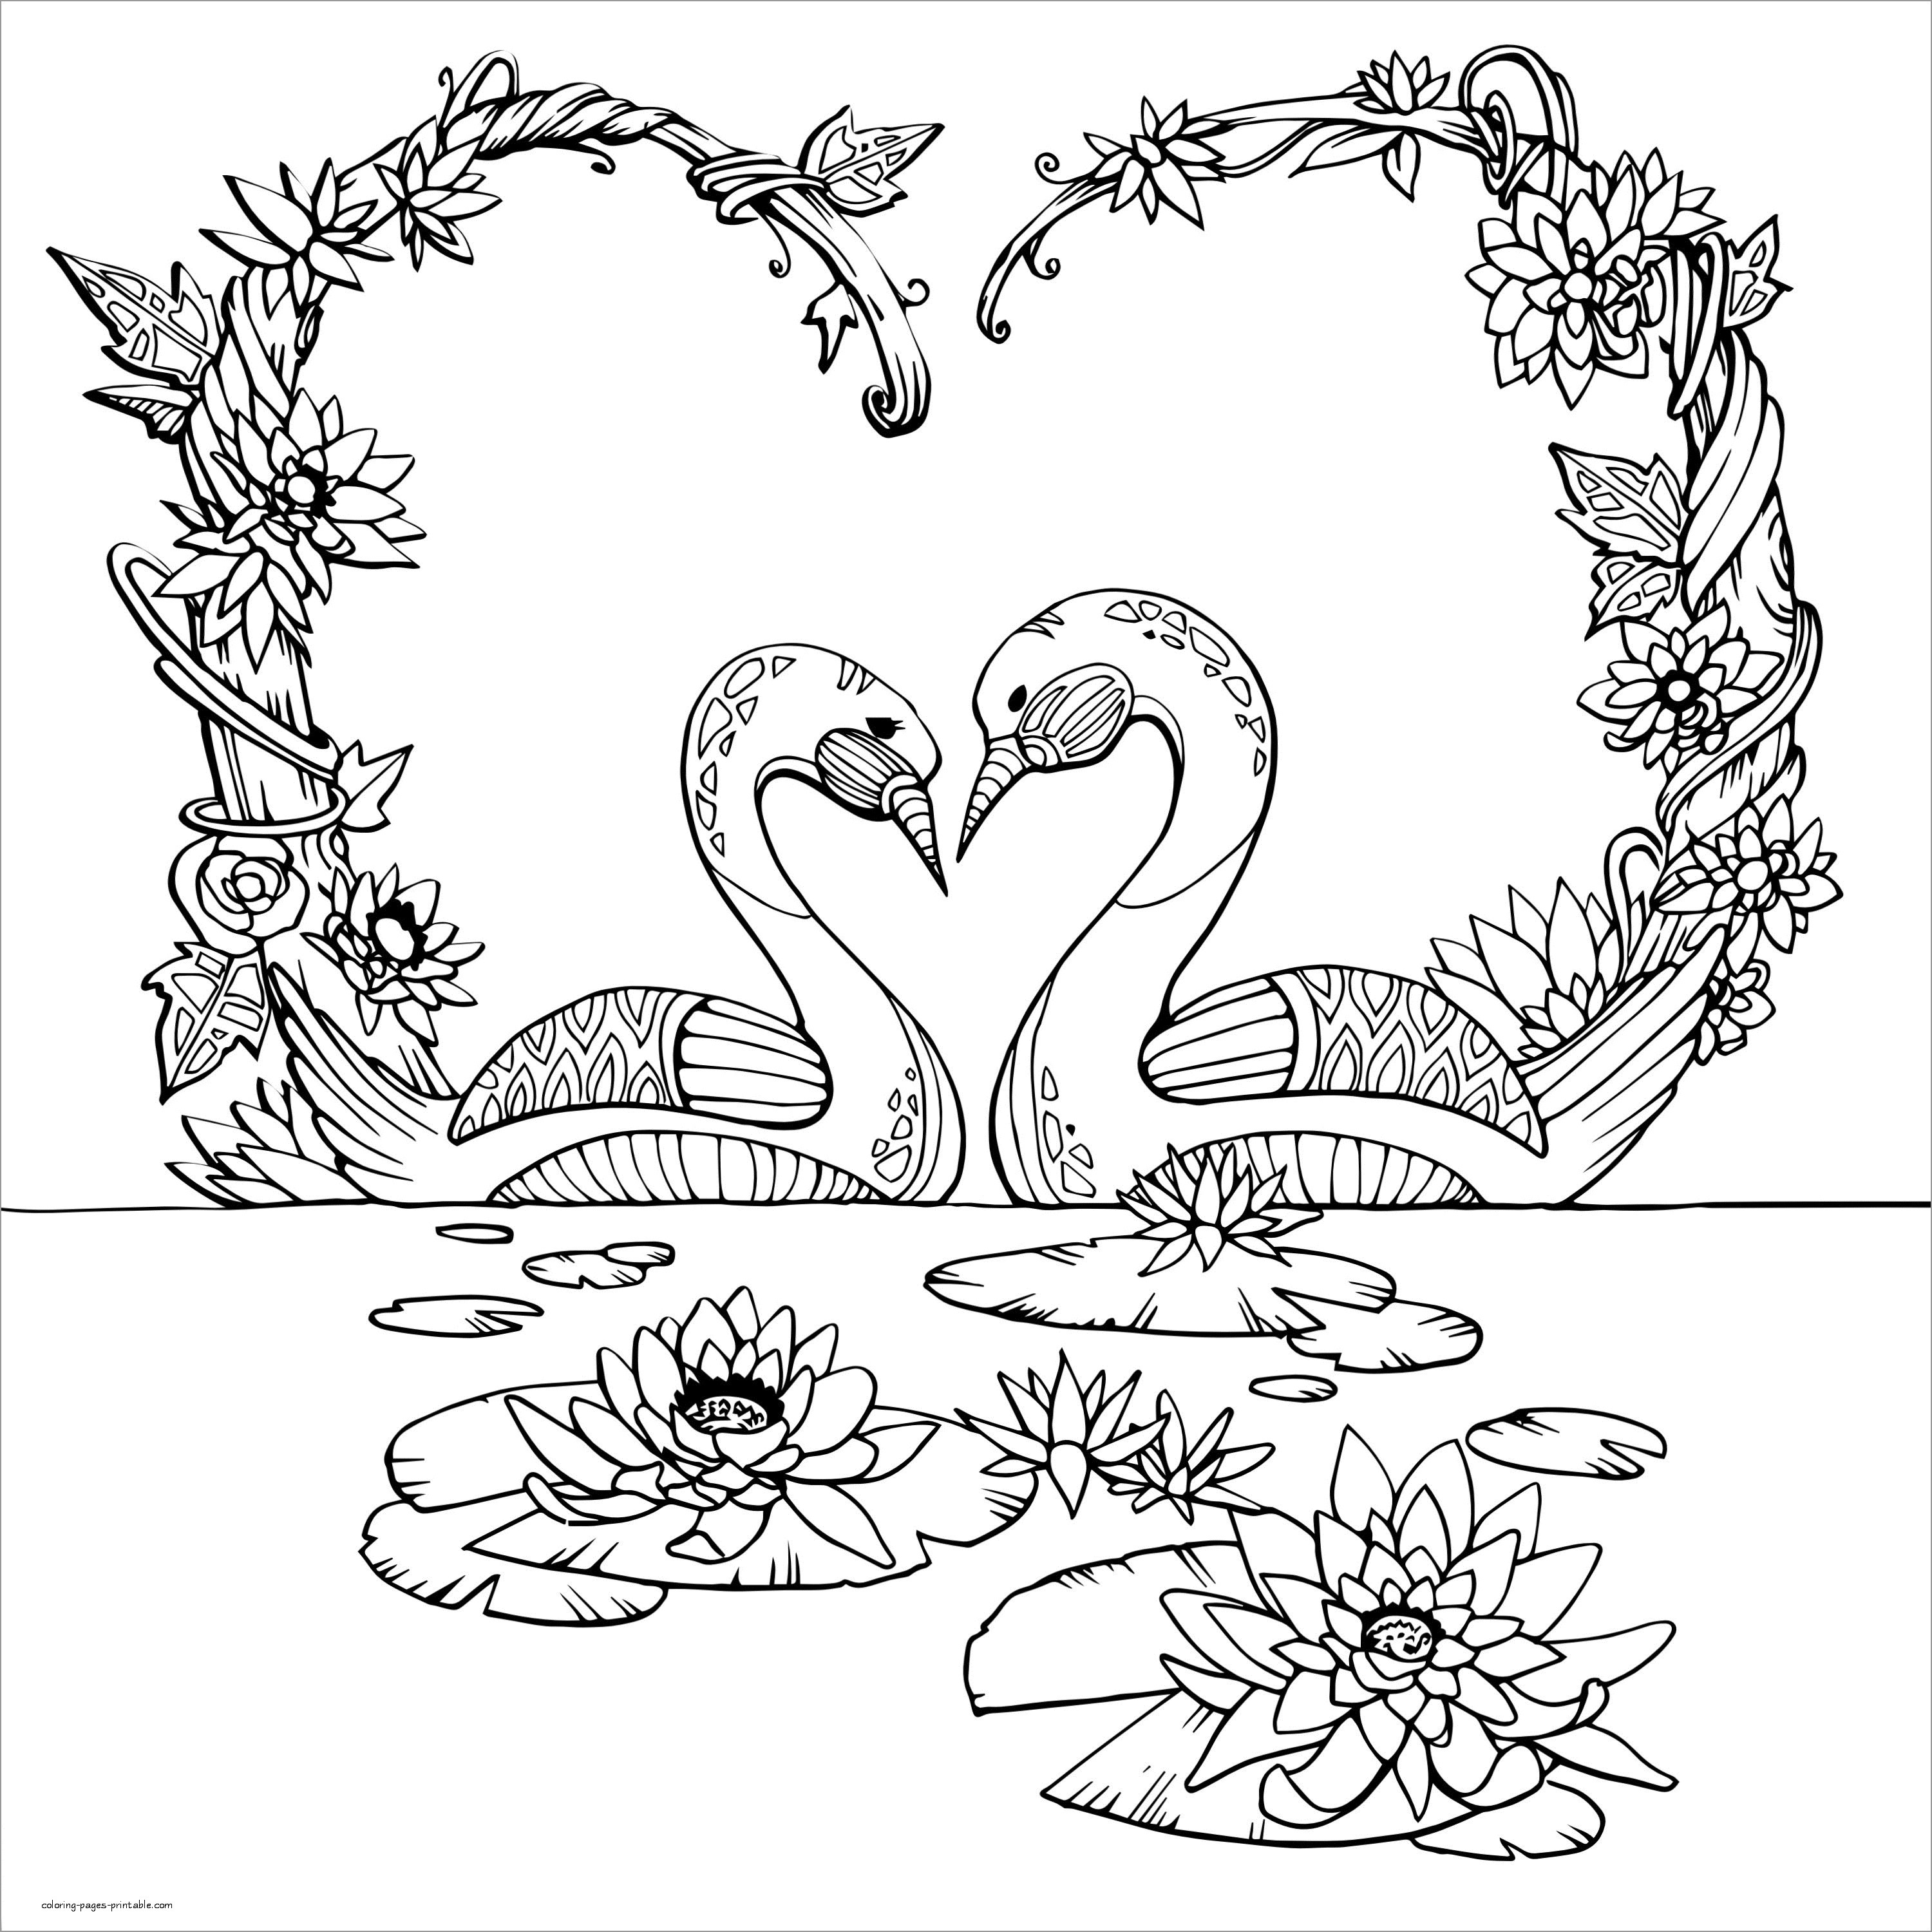 Hard Swan Coloring Page for Adult